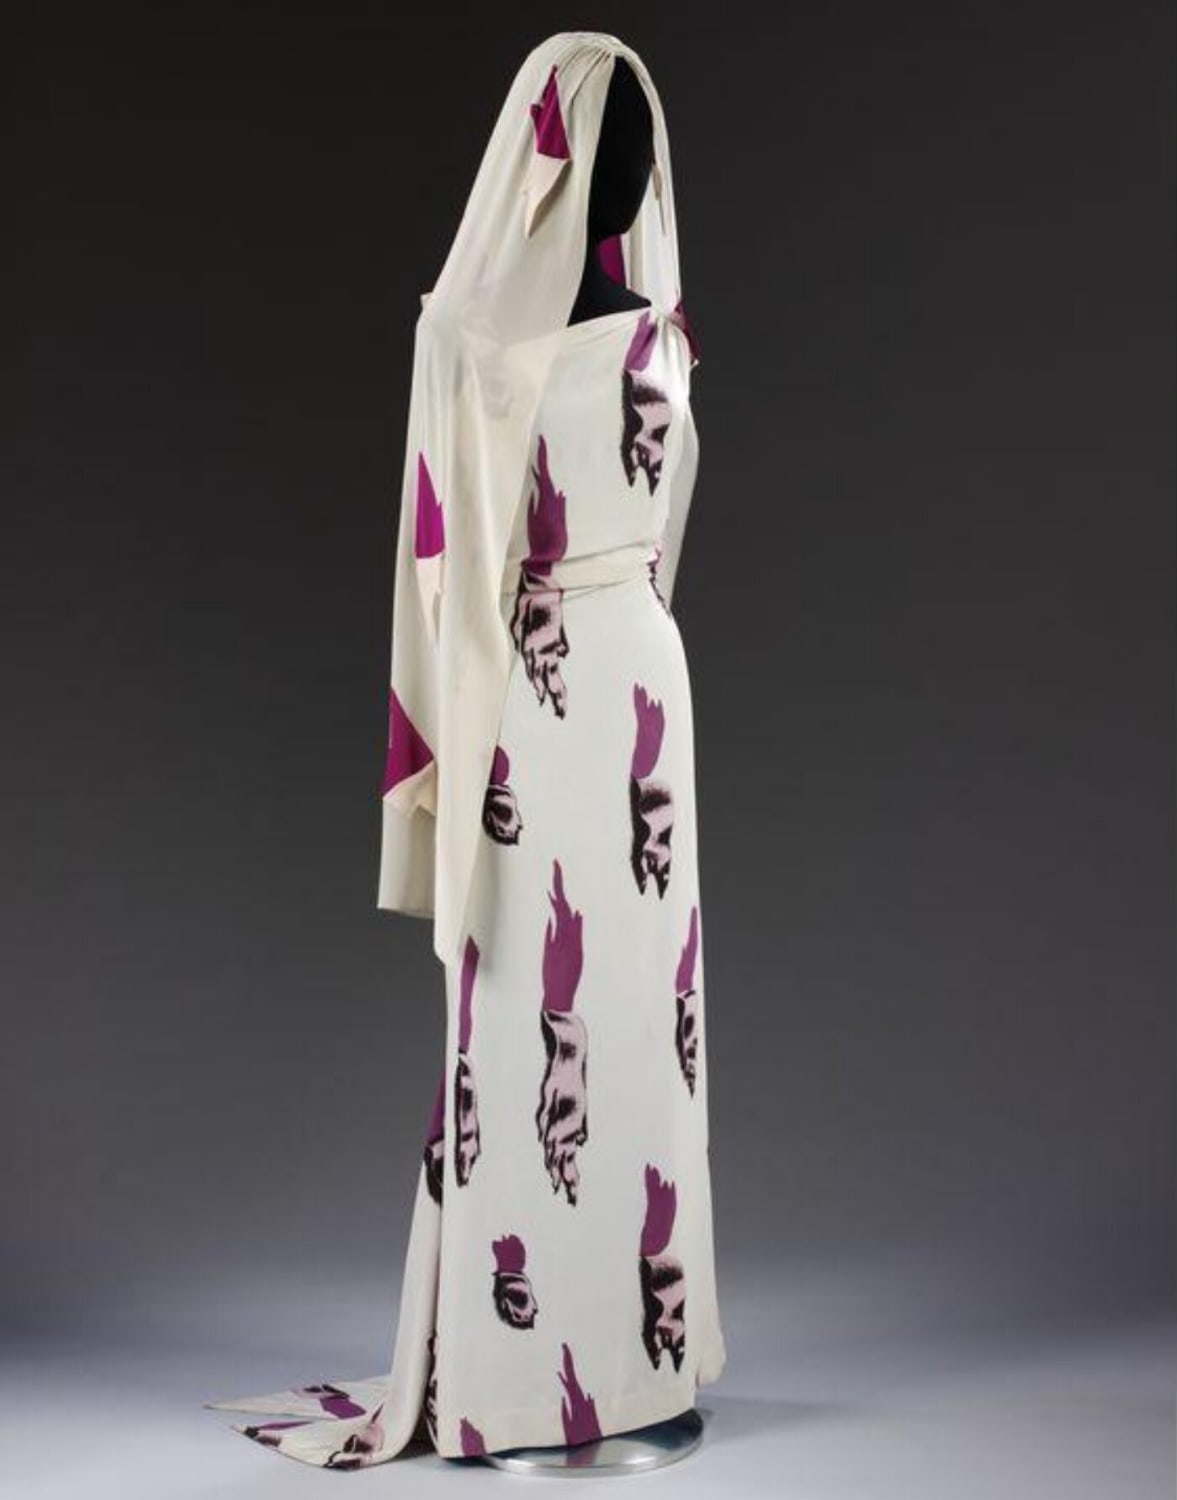 DidYouKnow this dress and veil by Elsa Schiaparelli was created using the print, ‘Tears,’ by her friend Salvador Dalí? The pattern, reminiscent of torn flesh is emblematic of Dalí’s bizarre and gothic style. Learn more: